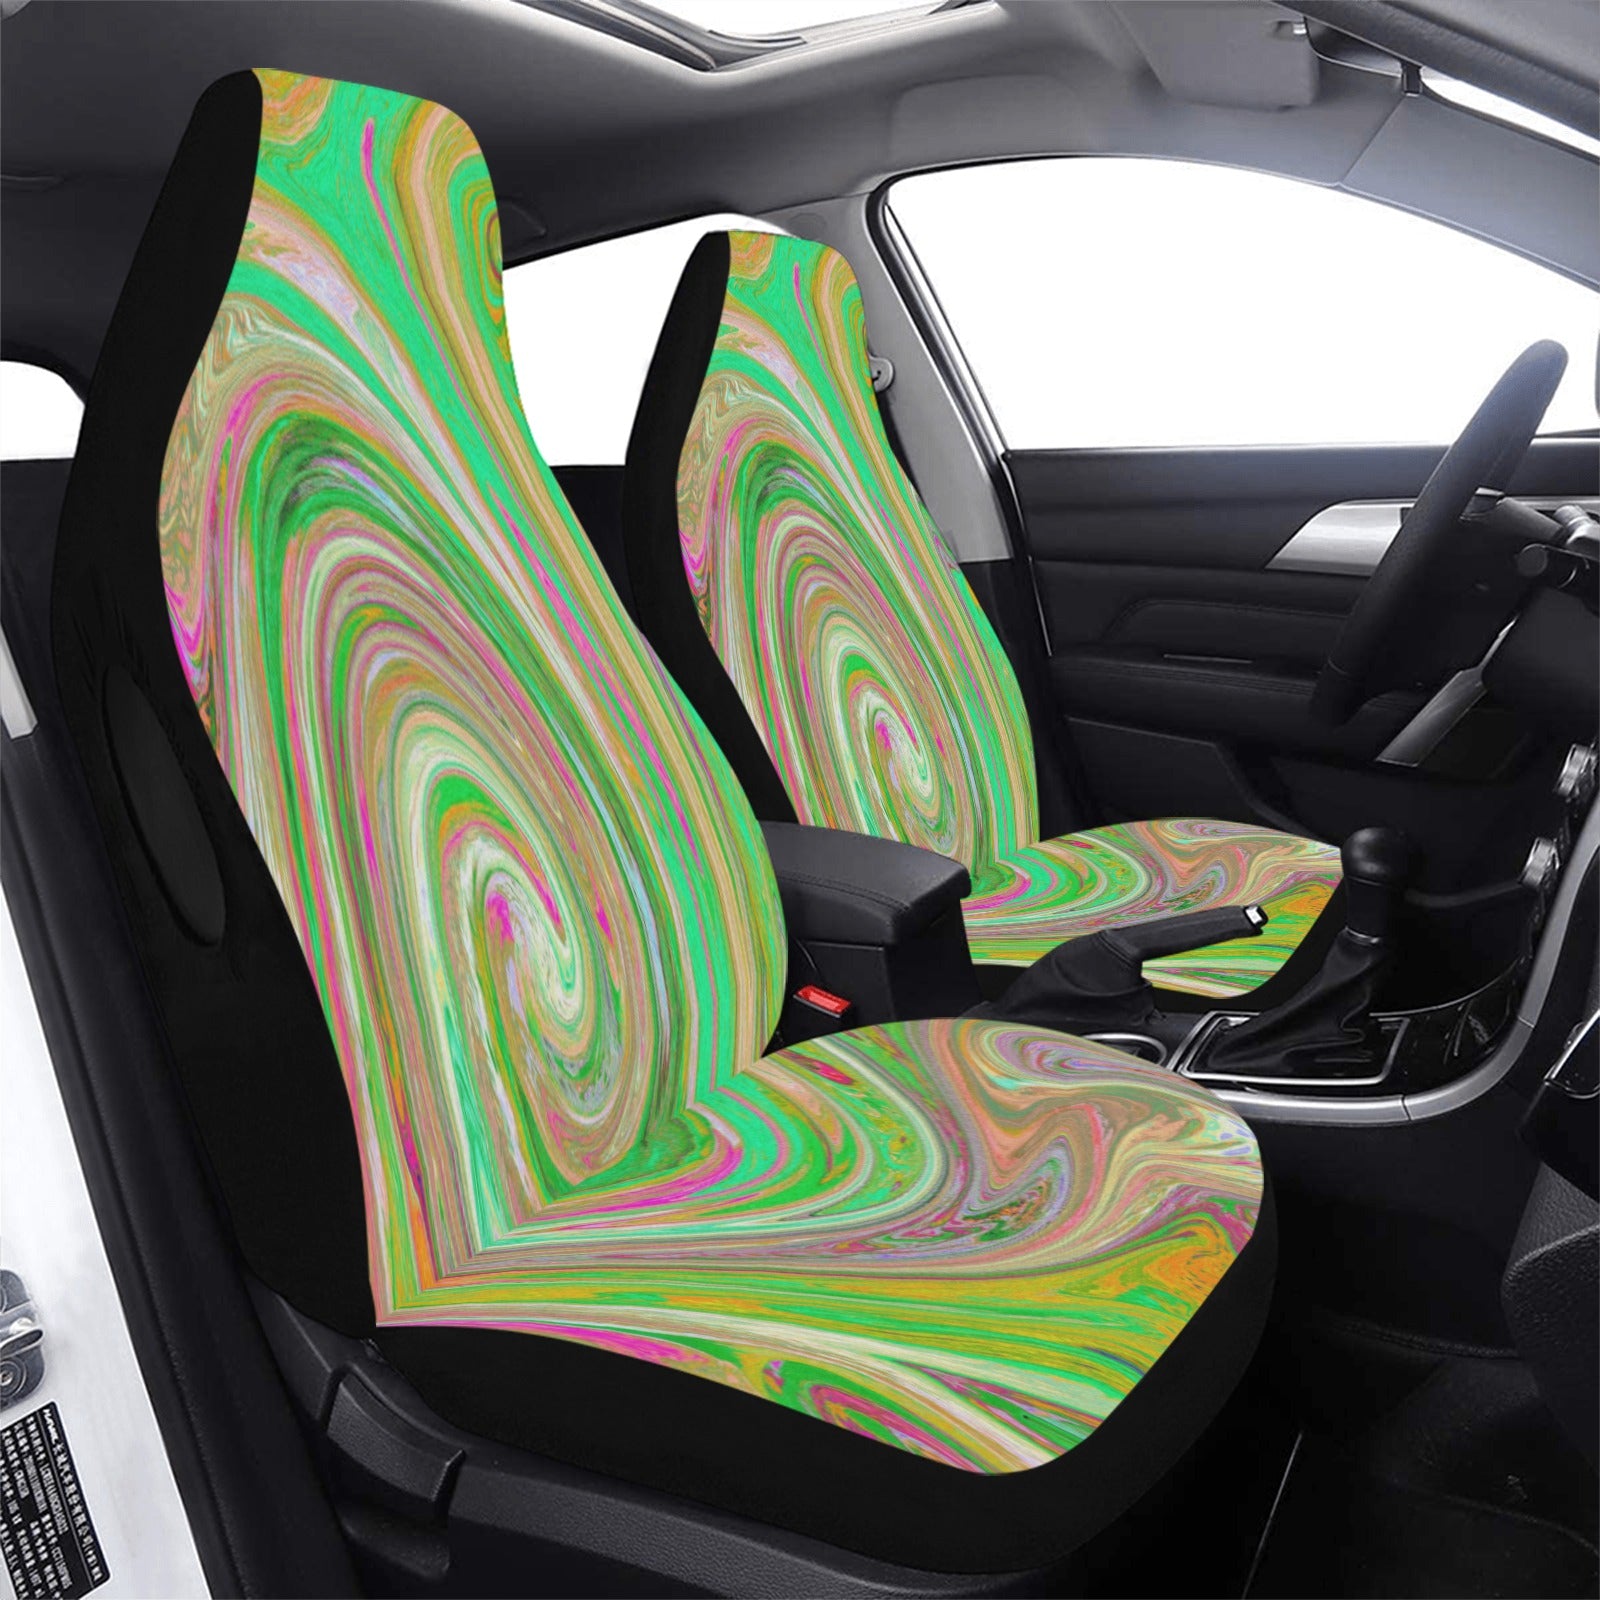 Car Seat Covers - Groovy Abstract Retro Green and Hot Pink Swirl